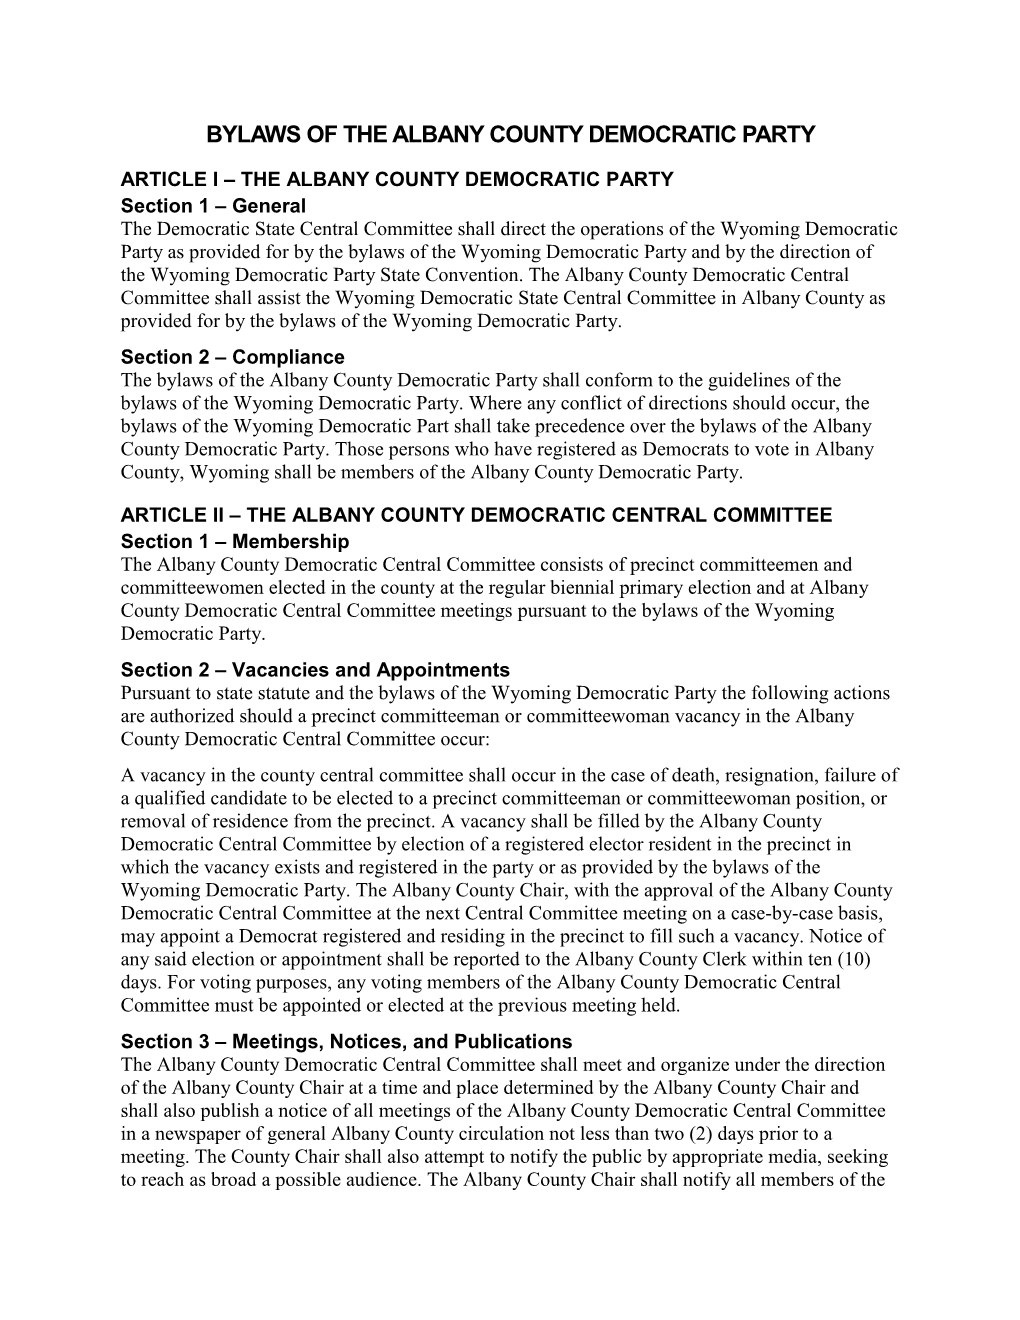 Bylaws of the Albany County Democratic Party